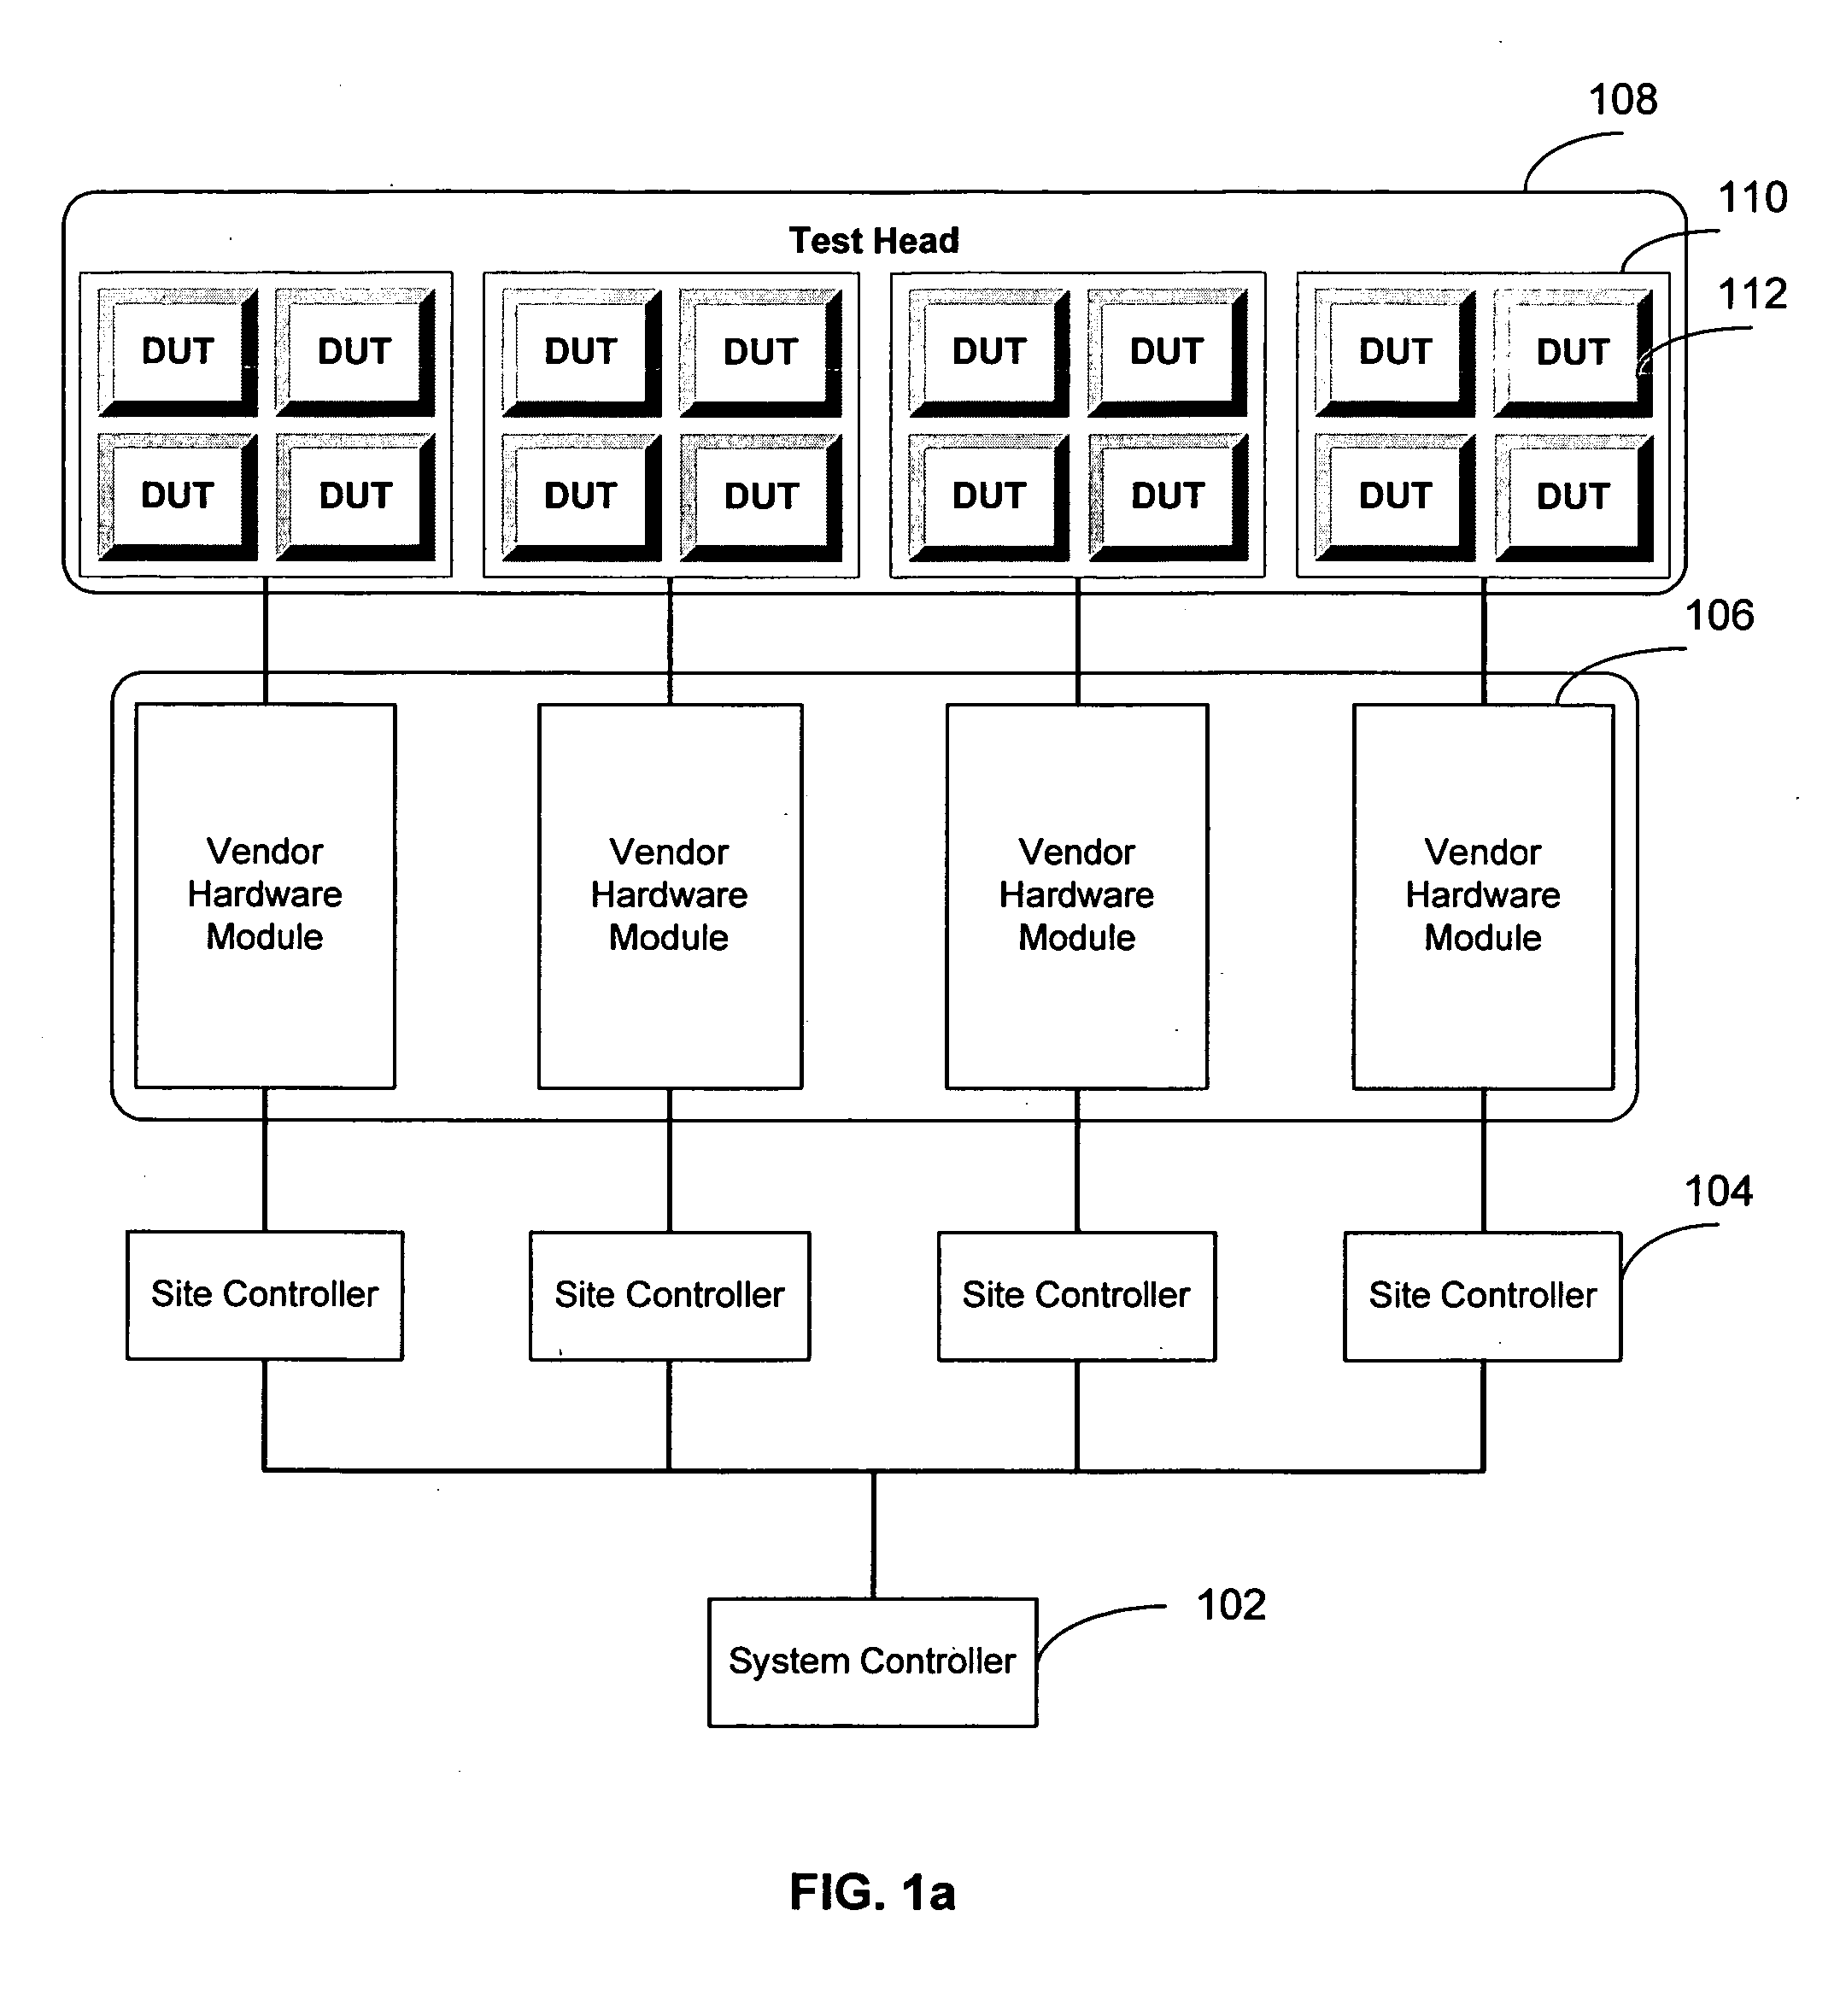 Compact representation of vendor hardware module revisions in an open architecture test system